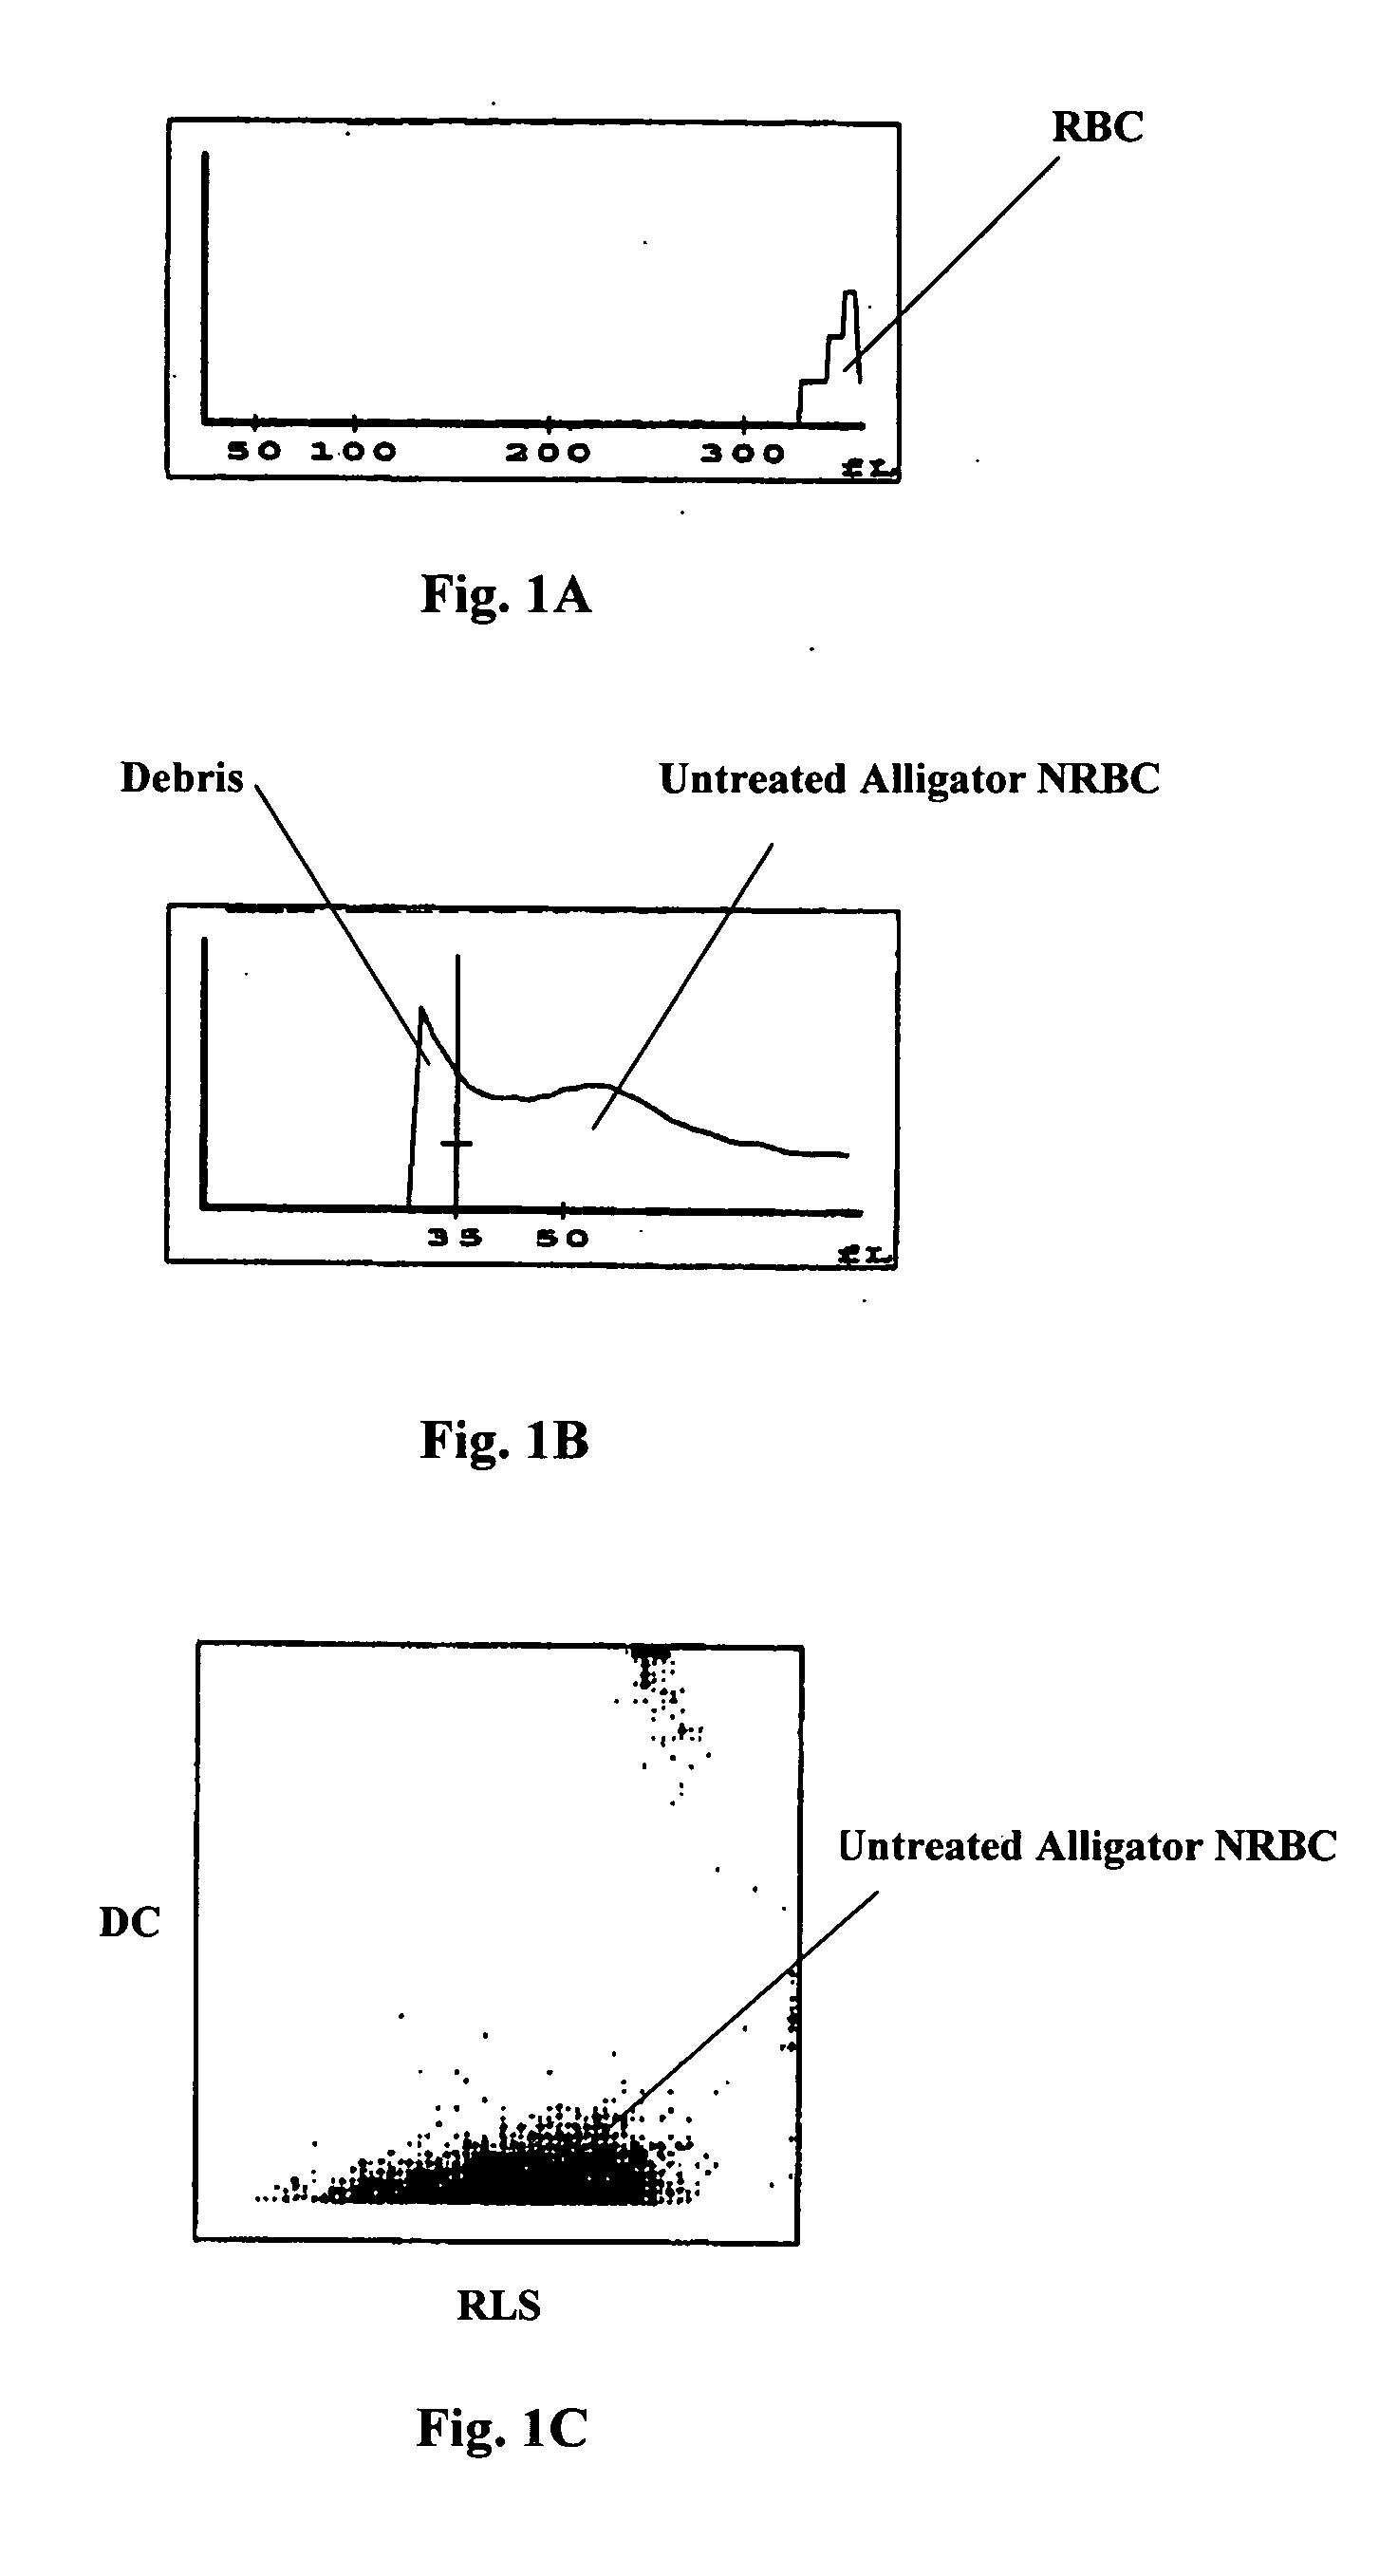 Reference control containing a nucleated red blood cell component